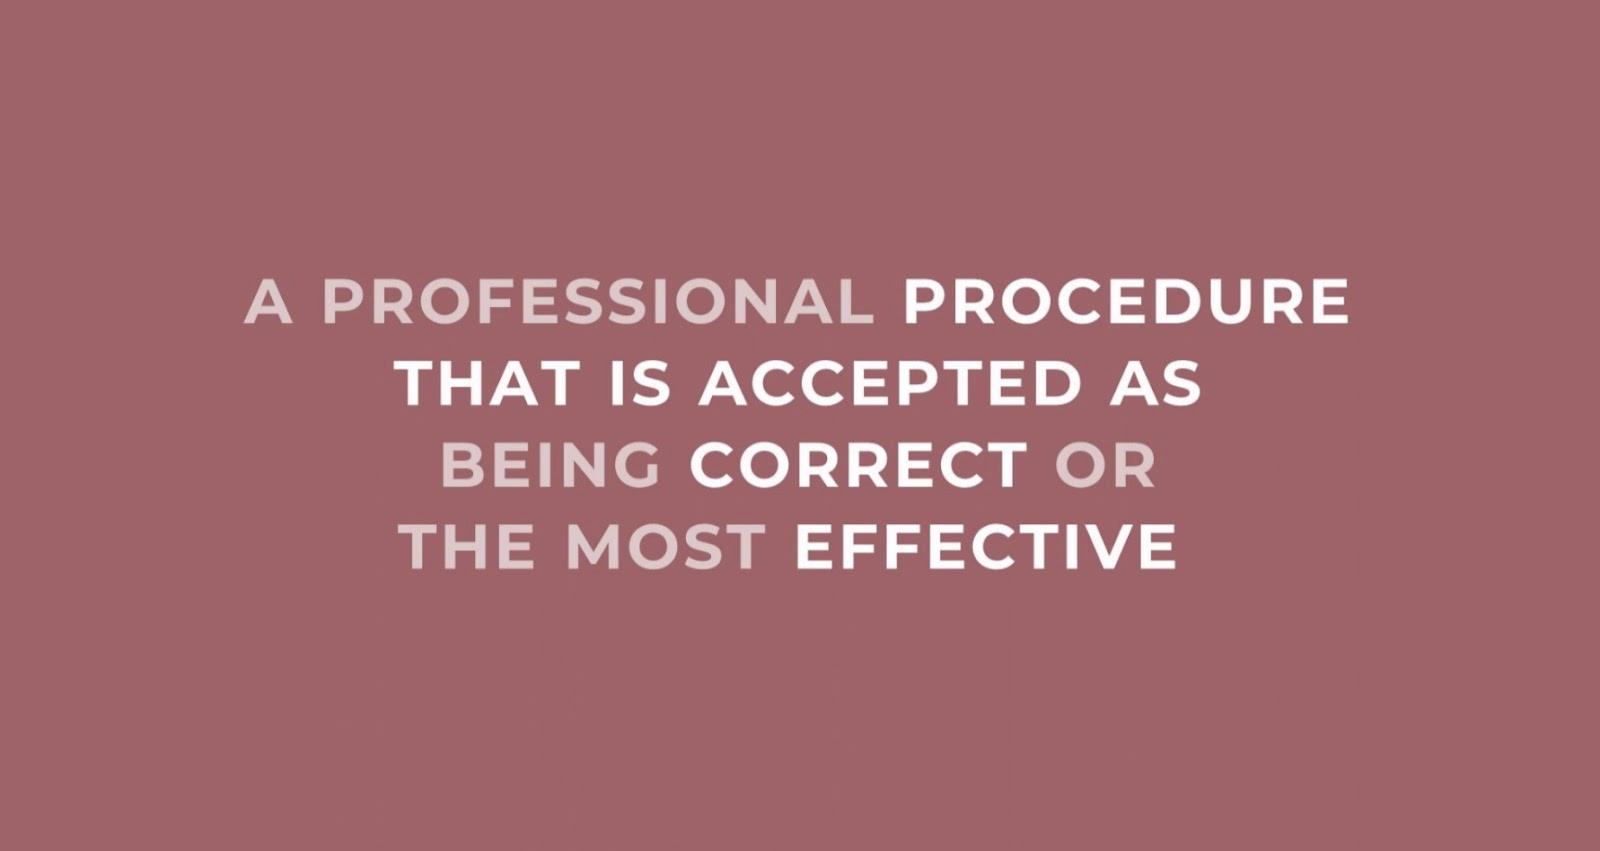 A definition of what best practice means according to James Doman-Pipe